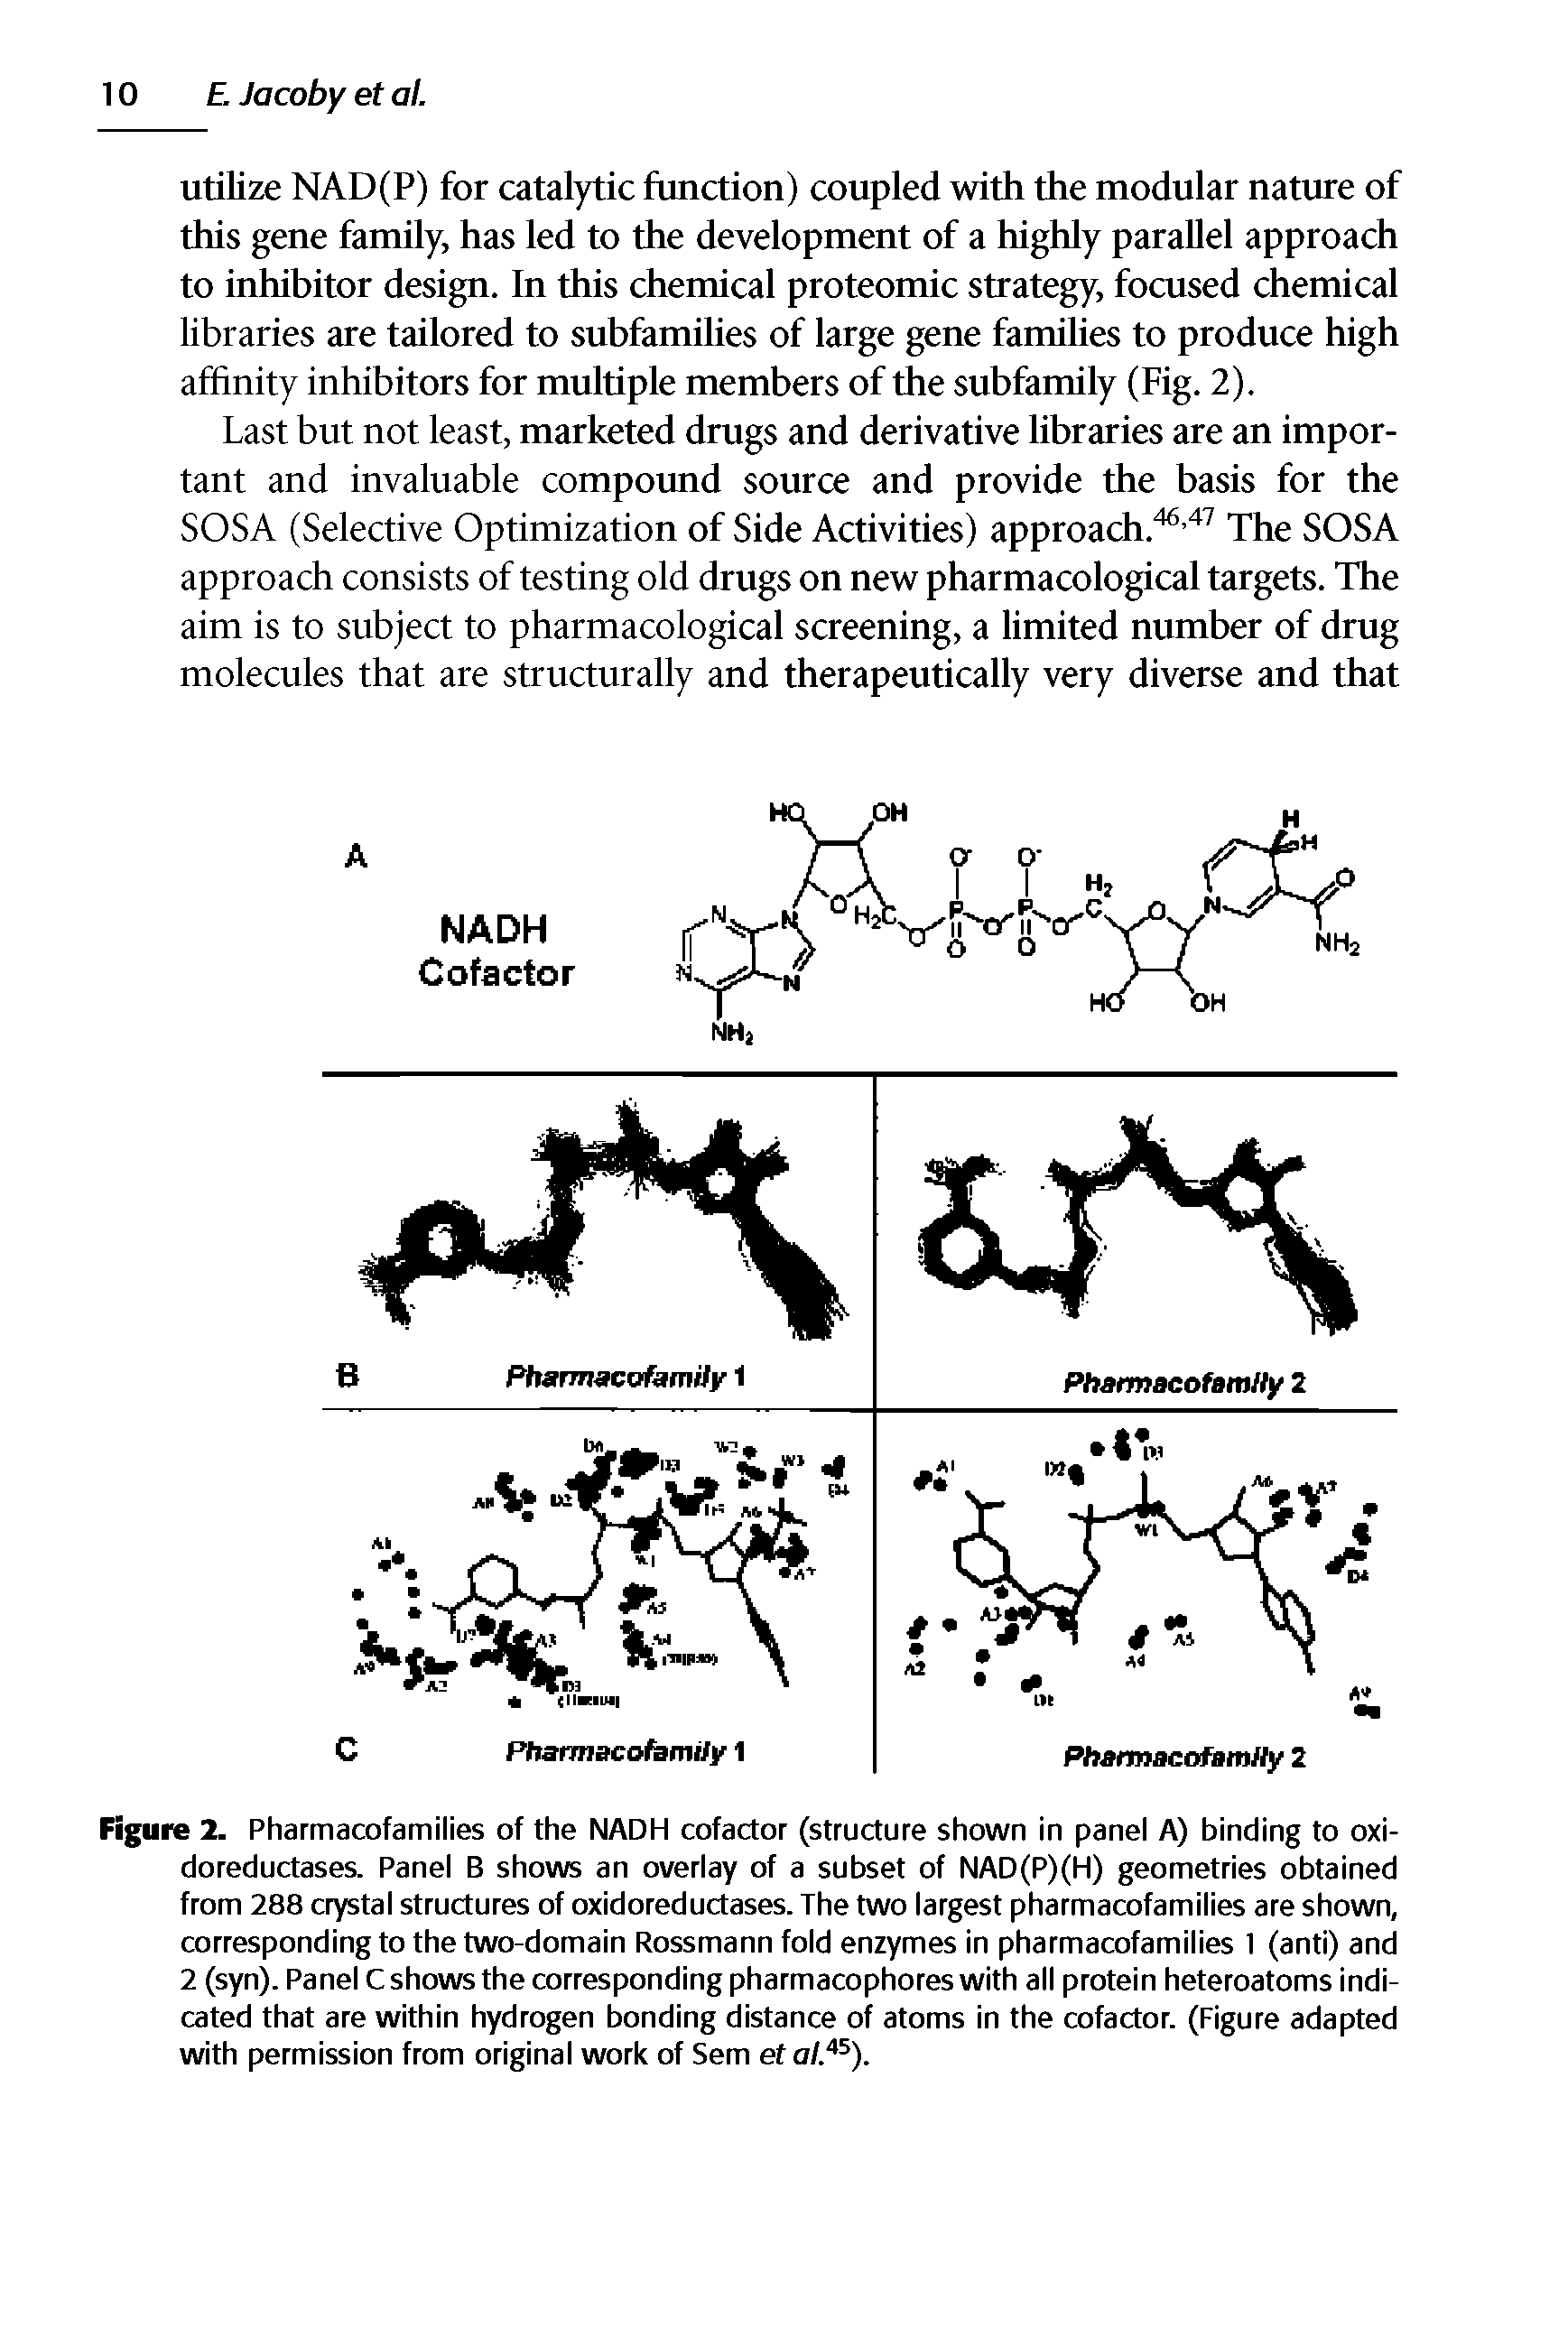 Figure 2. Pharmacofamilies of the NADH cofactor (structure shown in panel A) binding to oxi-doreductases. Panel B shows an overlay of a subset of NAD(P)(H) geometries obtained from 288 crystal structures of oxidoreductases. The two largest pharmacofamilies are shown, corresponding to the two-domain Rossmann fold enzymes in pharmacofamilies 1 (anti) and 2 (syn). Panel C shows the corresponding pharmacophores with all protein heteroatoms indicated that are within hydrogen bonding distance of atoms in the cofactor. (Figure adapted with permission from original work of Sem ef o/. ).